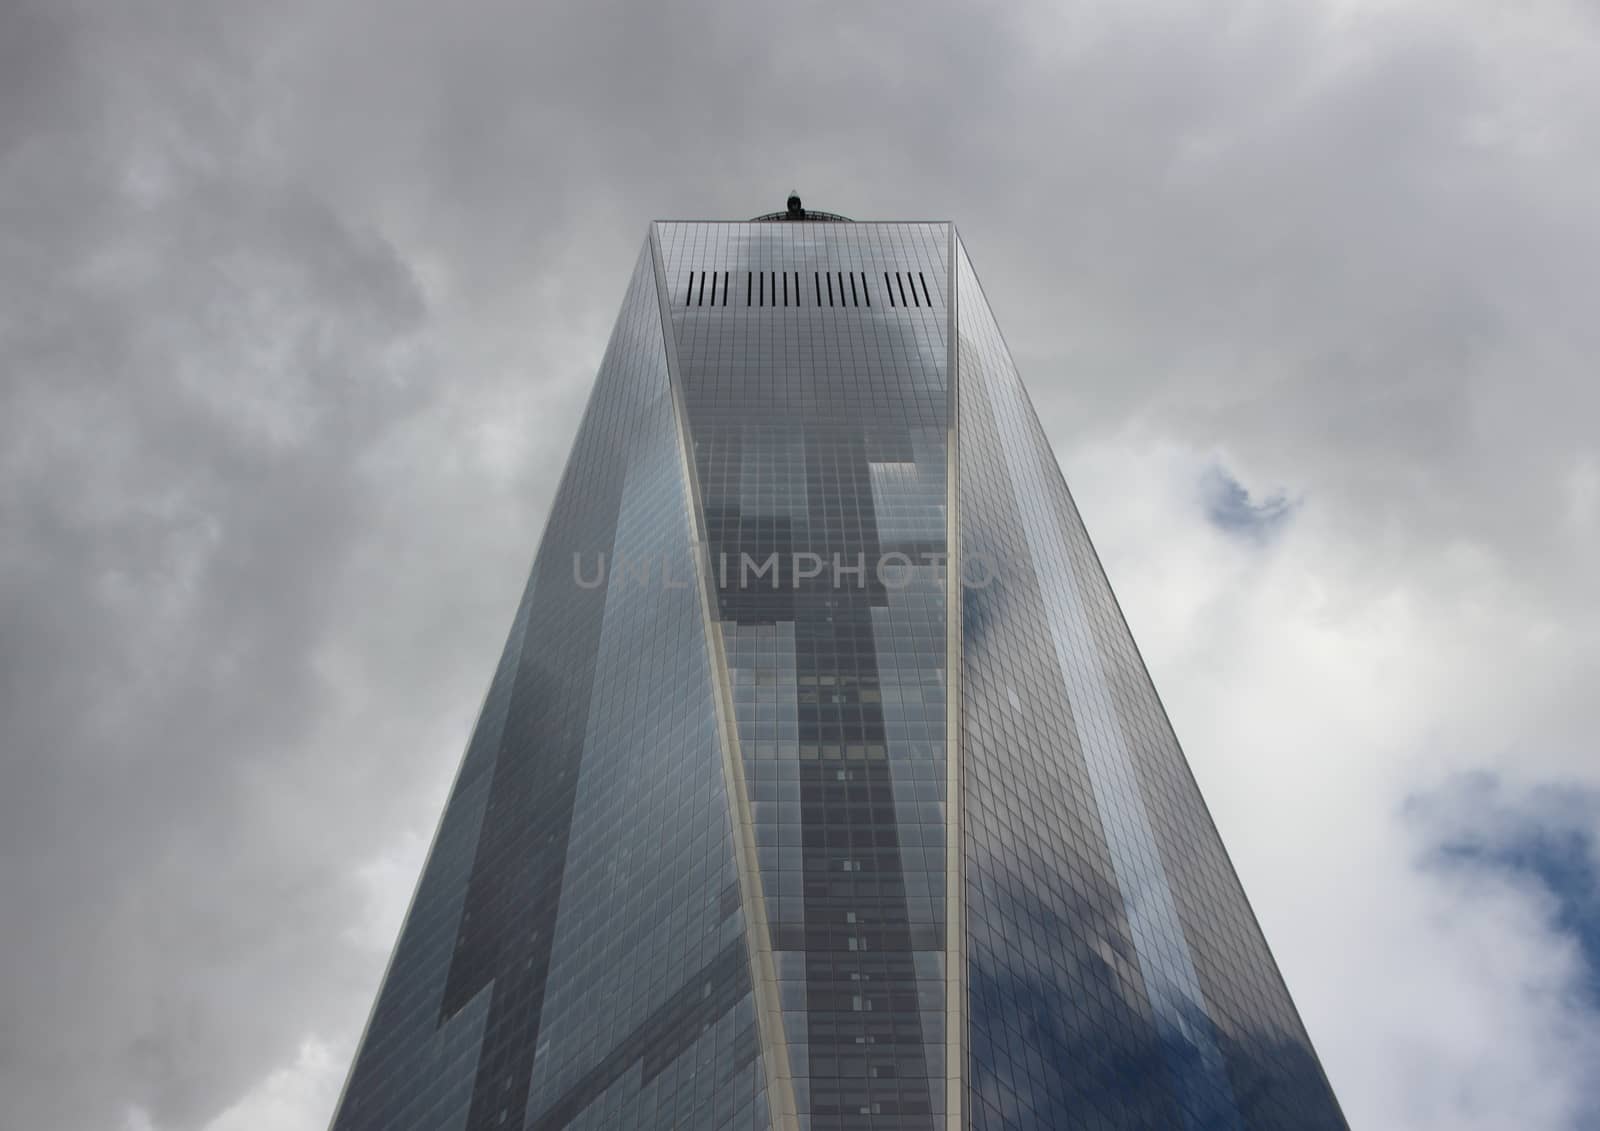 Freedom Tower One World Trade Center New York with Dramatic Clouds